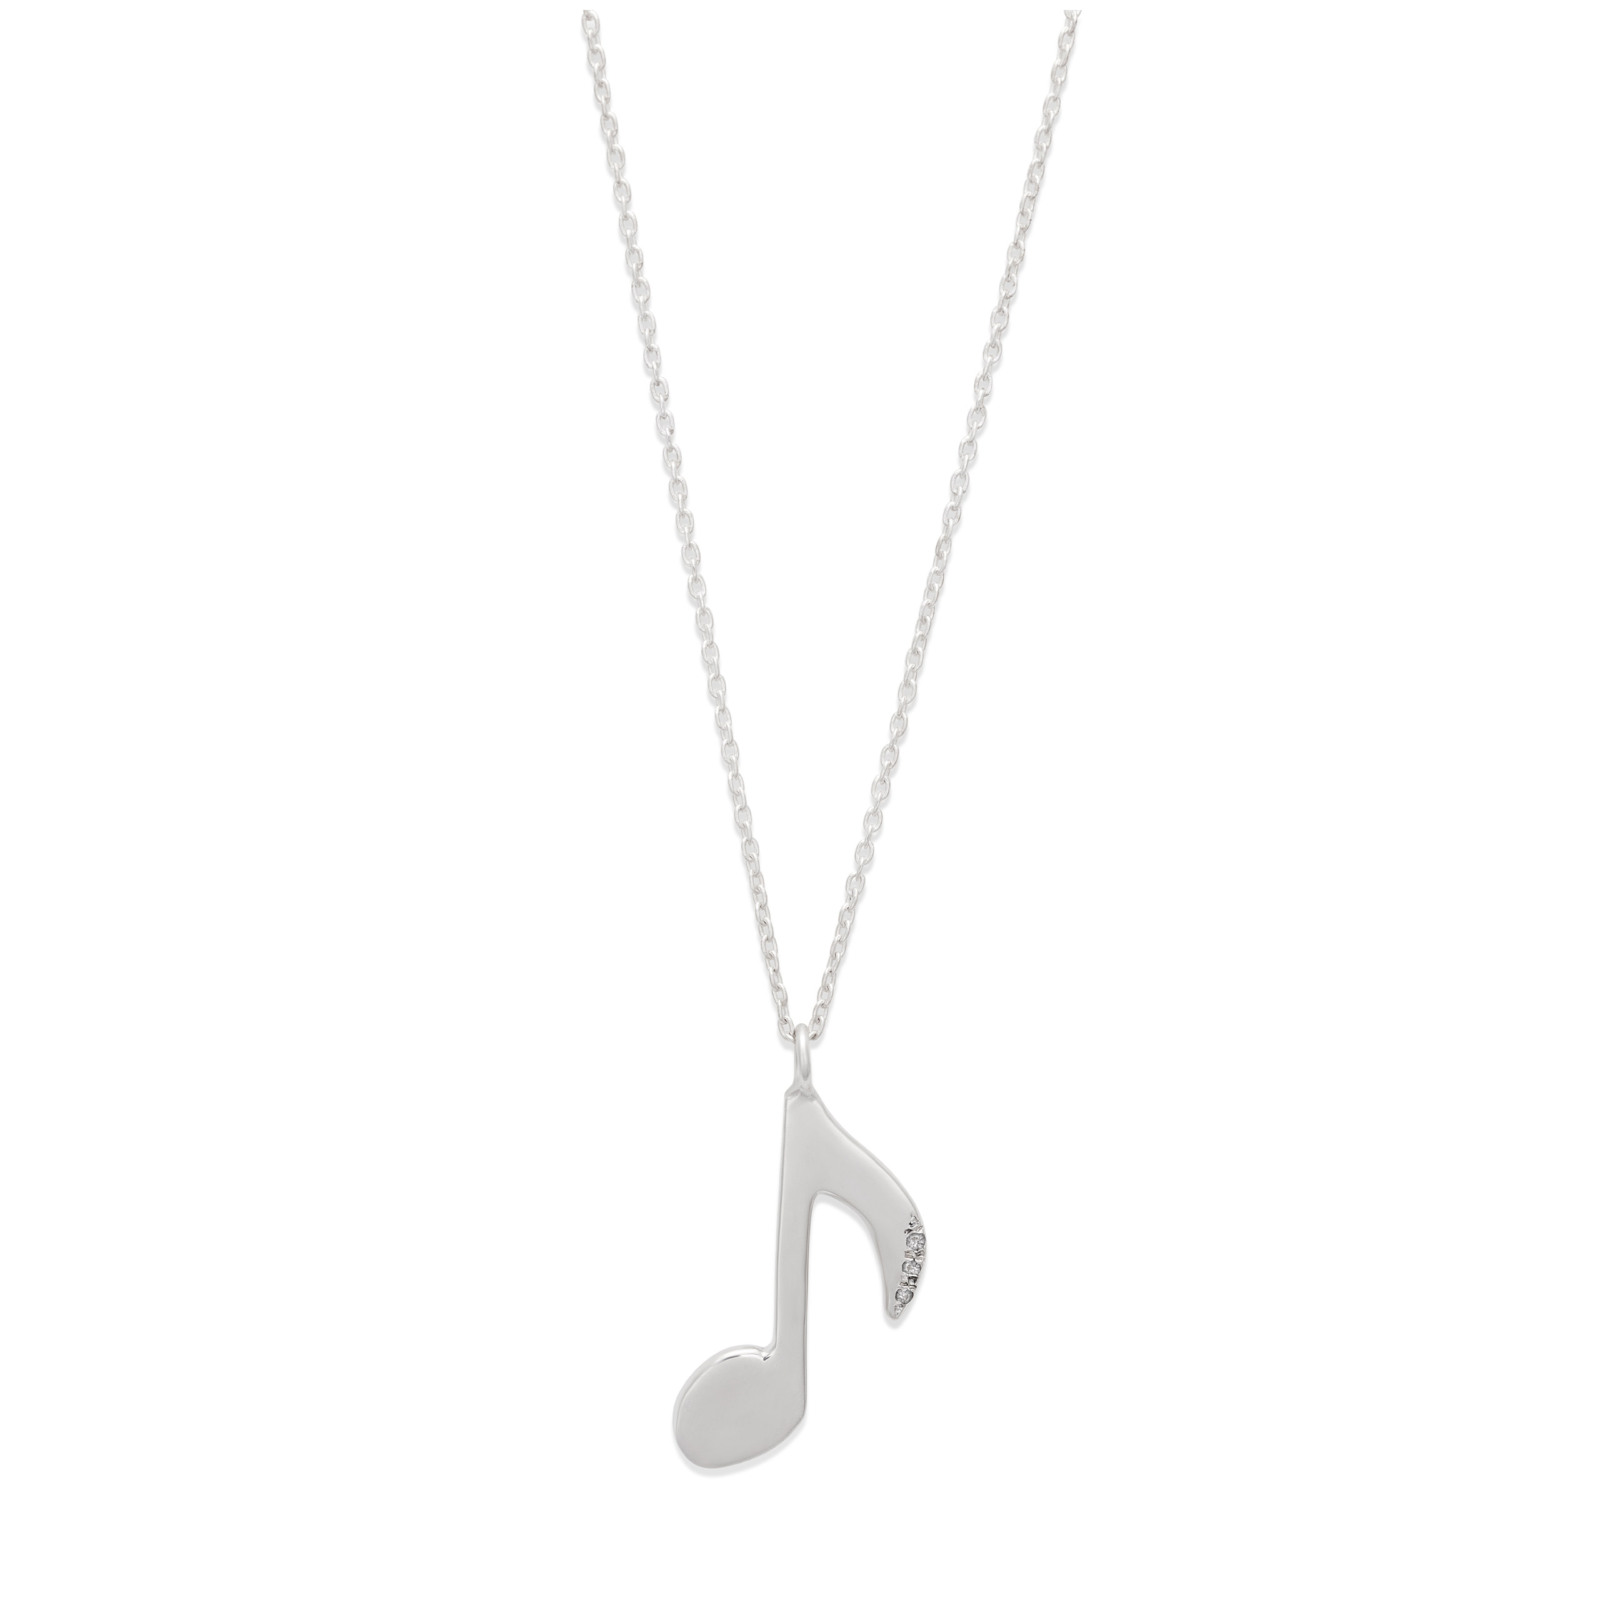 music note charm necklace white diamond 14k sterling silver